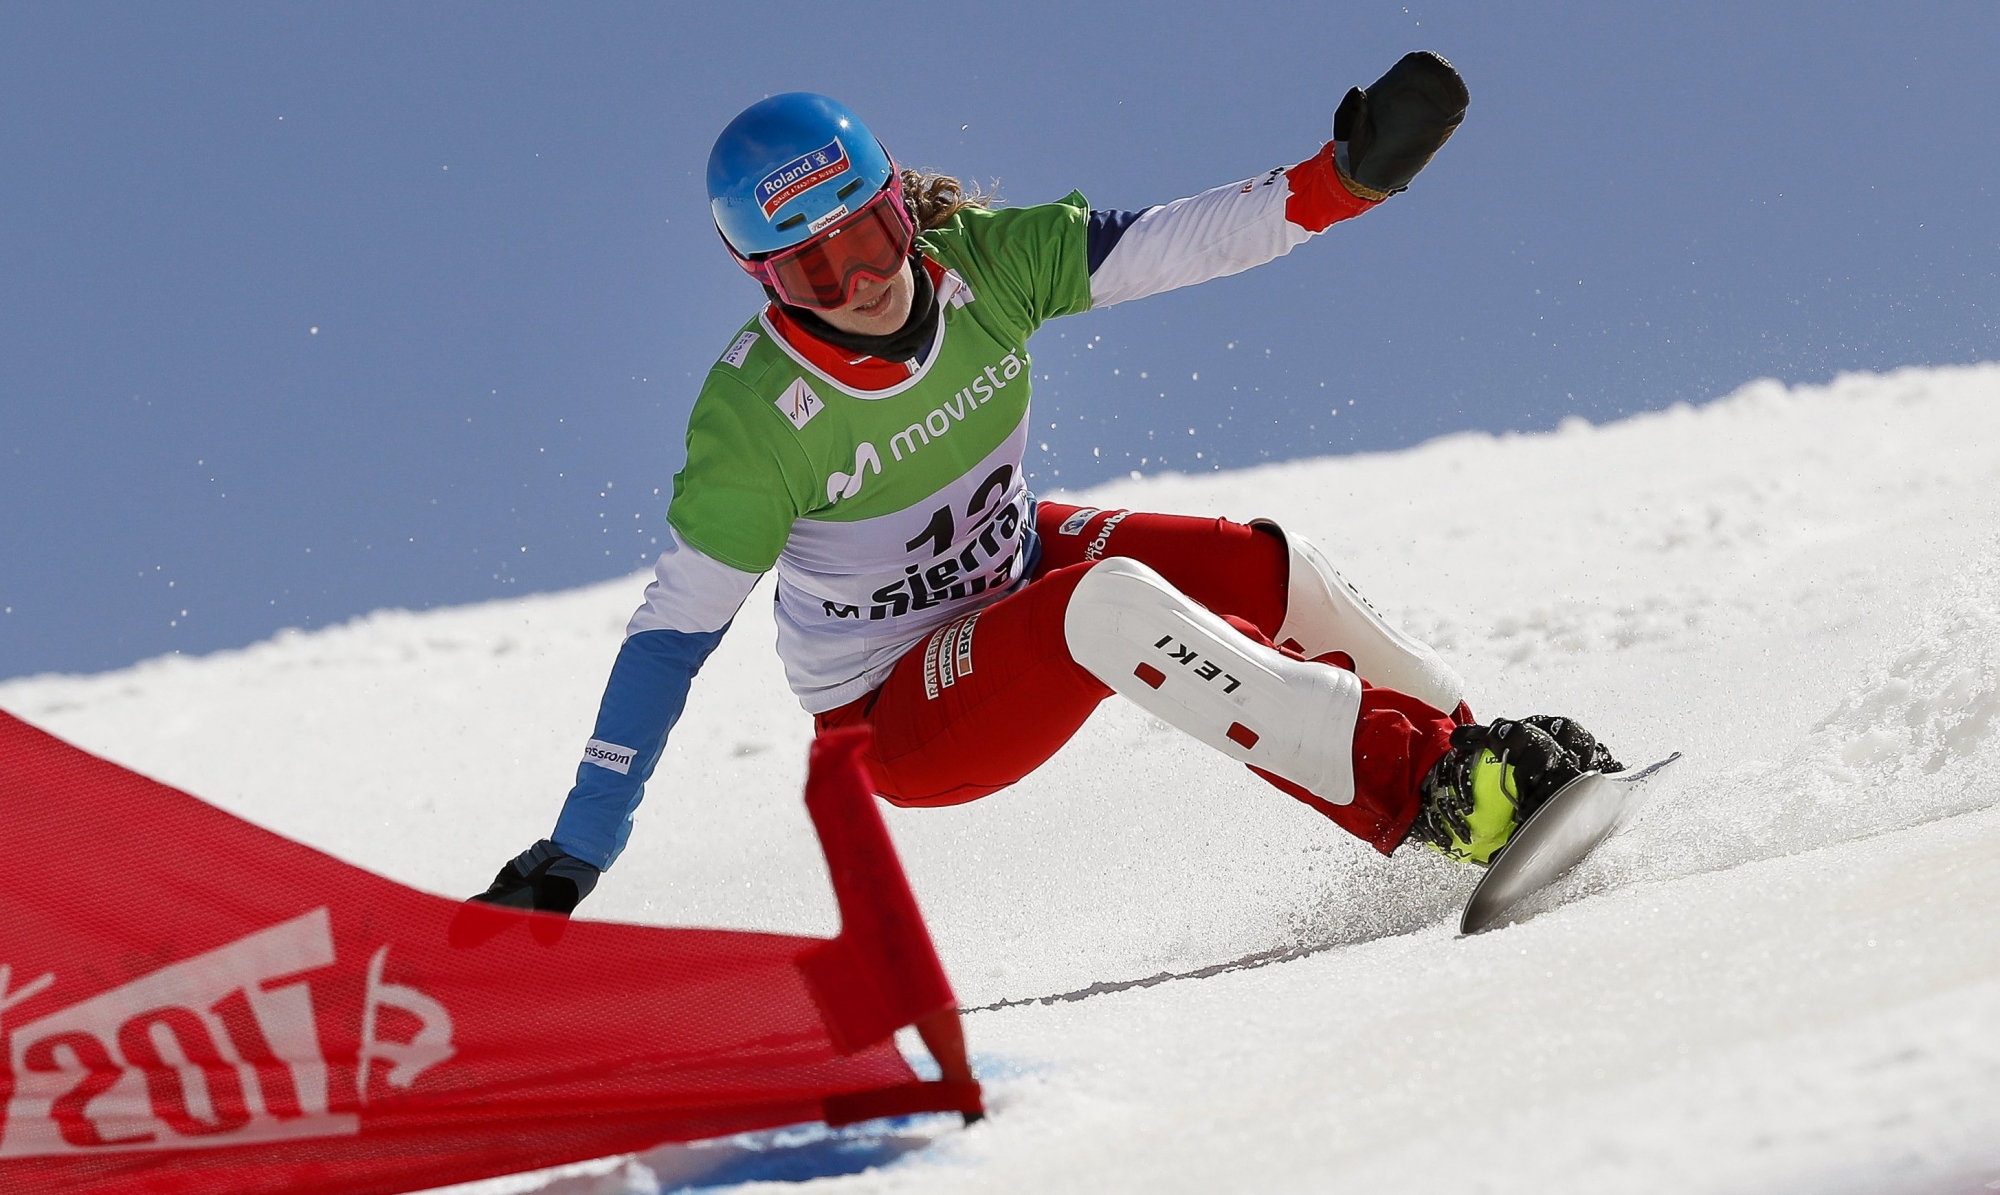 epa05852466 Switzerland's Patrizia Kummer is on her way to win the silver medal in the women's Parallel Giant Slalom event at the FIS Freestyle Ski and Snowboard World Championships 2017 in the Sierra Nevada, near Granada, southern Spain, Spain, 16 March 2017.  EPA/JULIO MUNOZ